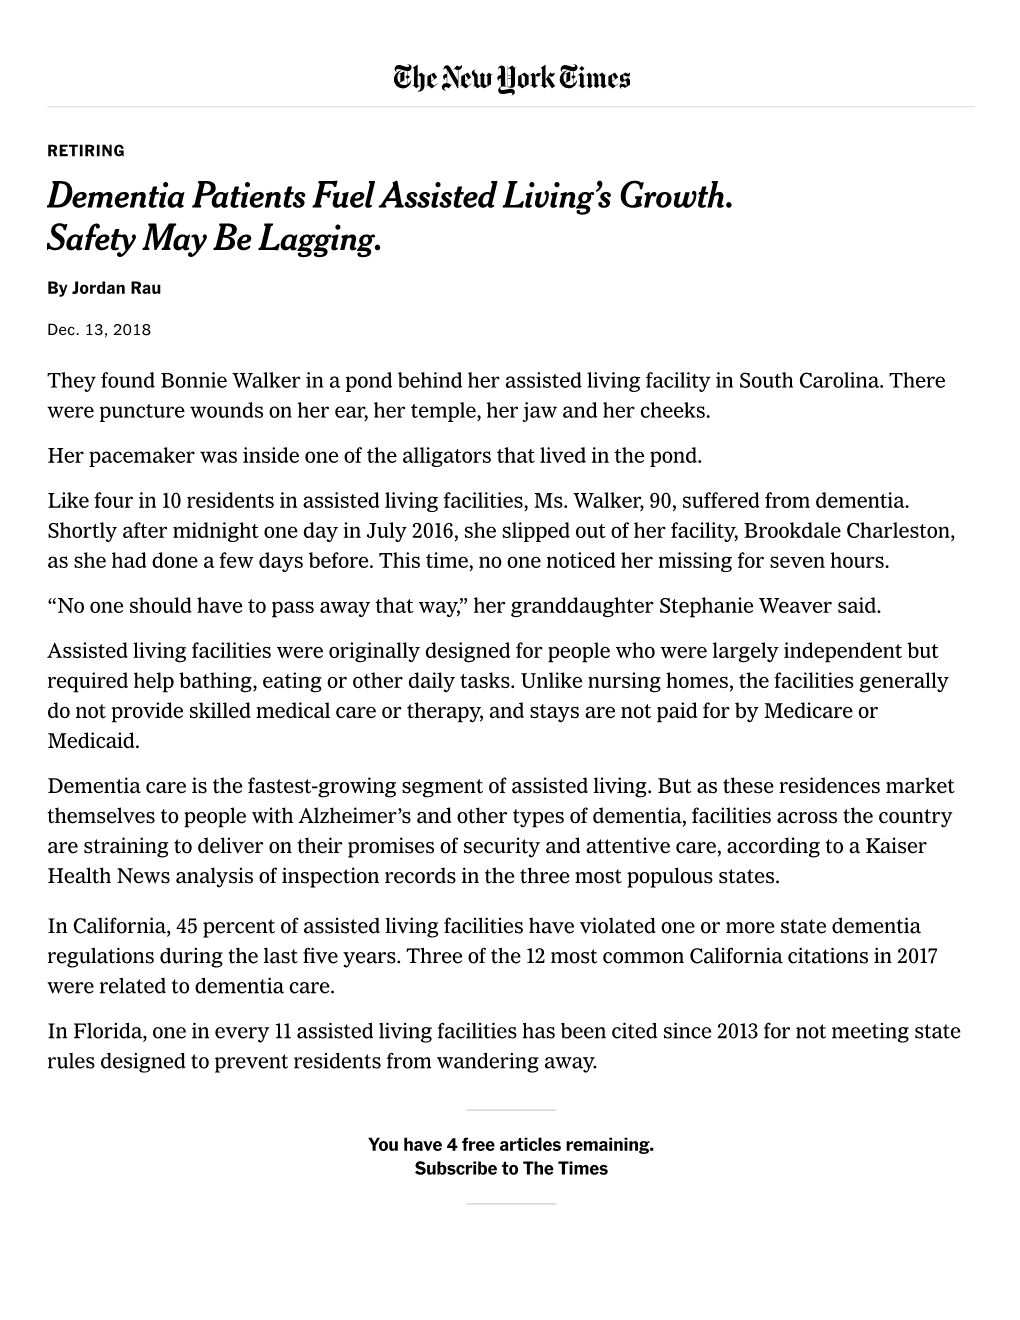 Dementia Patients Fuel Assisted Living's Growth. Safety May Be